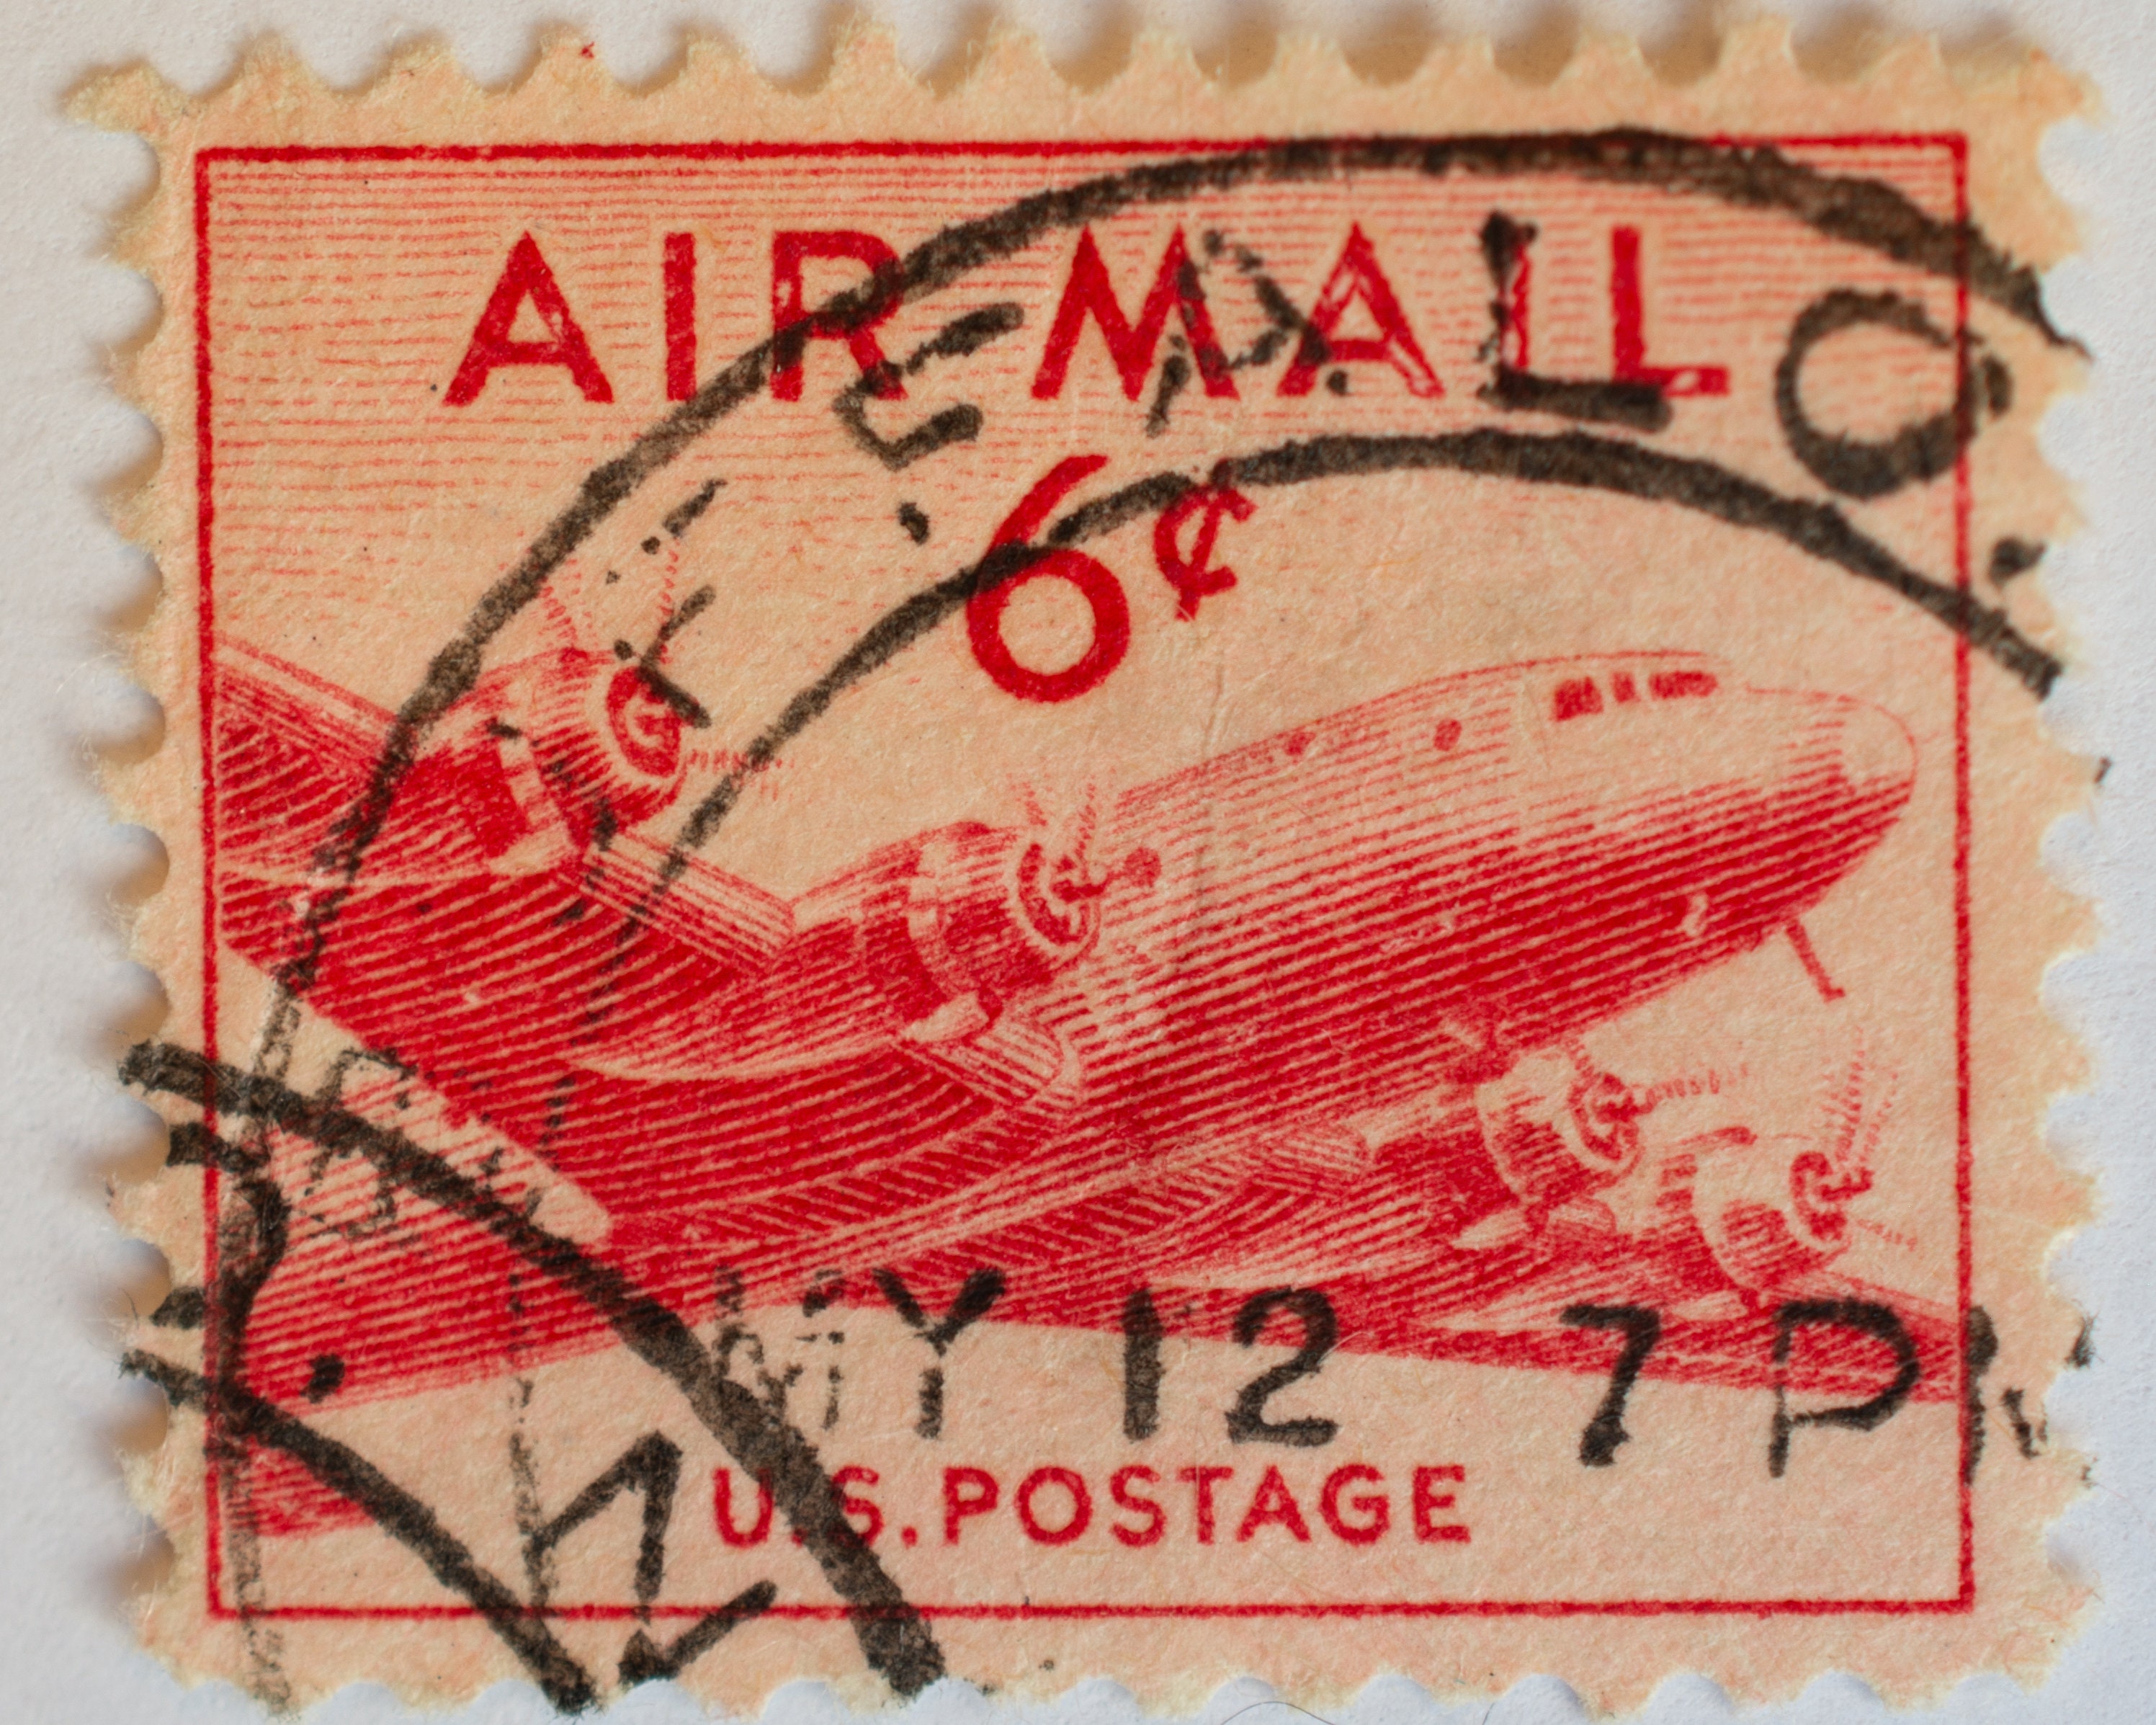 Old postal letter with postmark stamps. Antique airmail letters with plane  border mark icon template, air mail stamp label and …